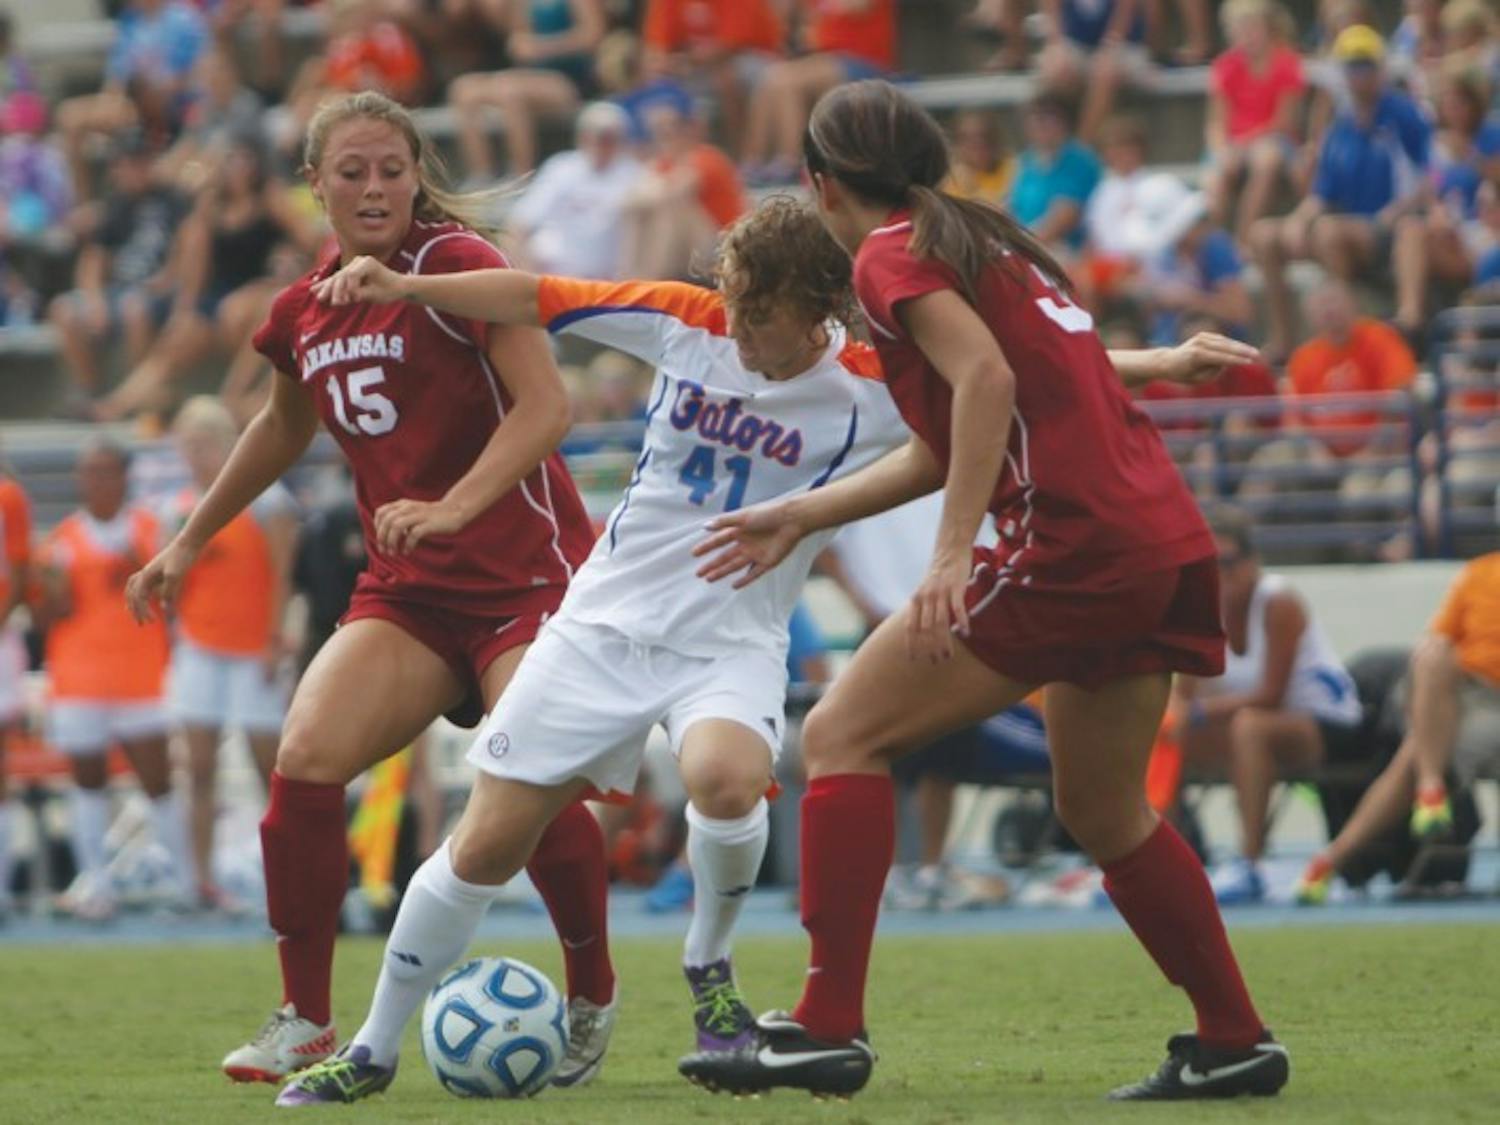 Junior outside back Taylor Travis (41) fights for the ball against Arkansas defenders Yvonne DesJarlais (15) and Evan Palmer (31) in Florida’s 4-0 win on Sept. 30 at James G. Pressly Stadium. Travis played a major role in preserving a road victory against Texas A&amp;M on Sunday.